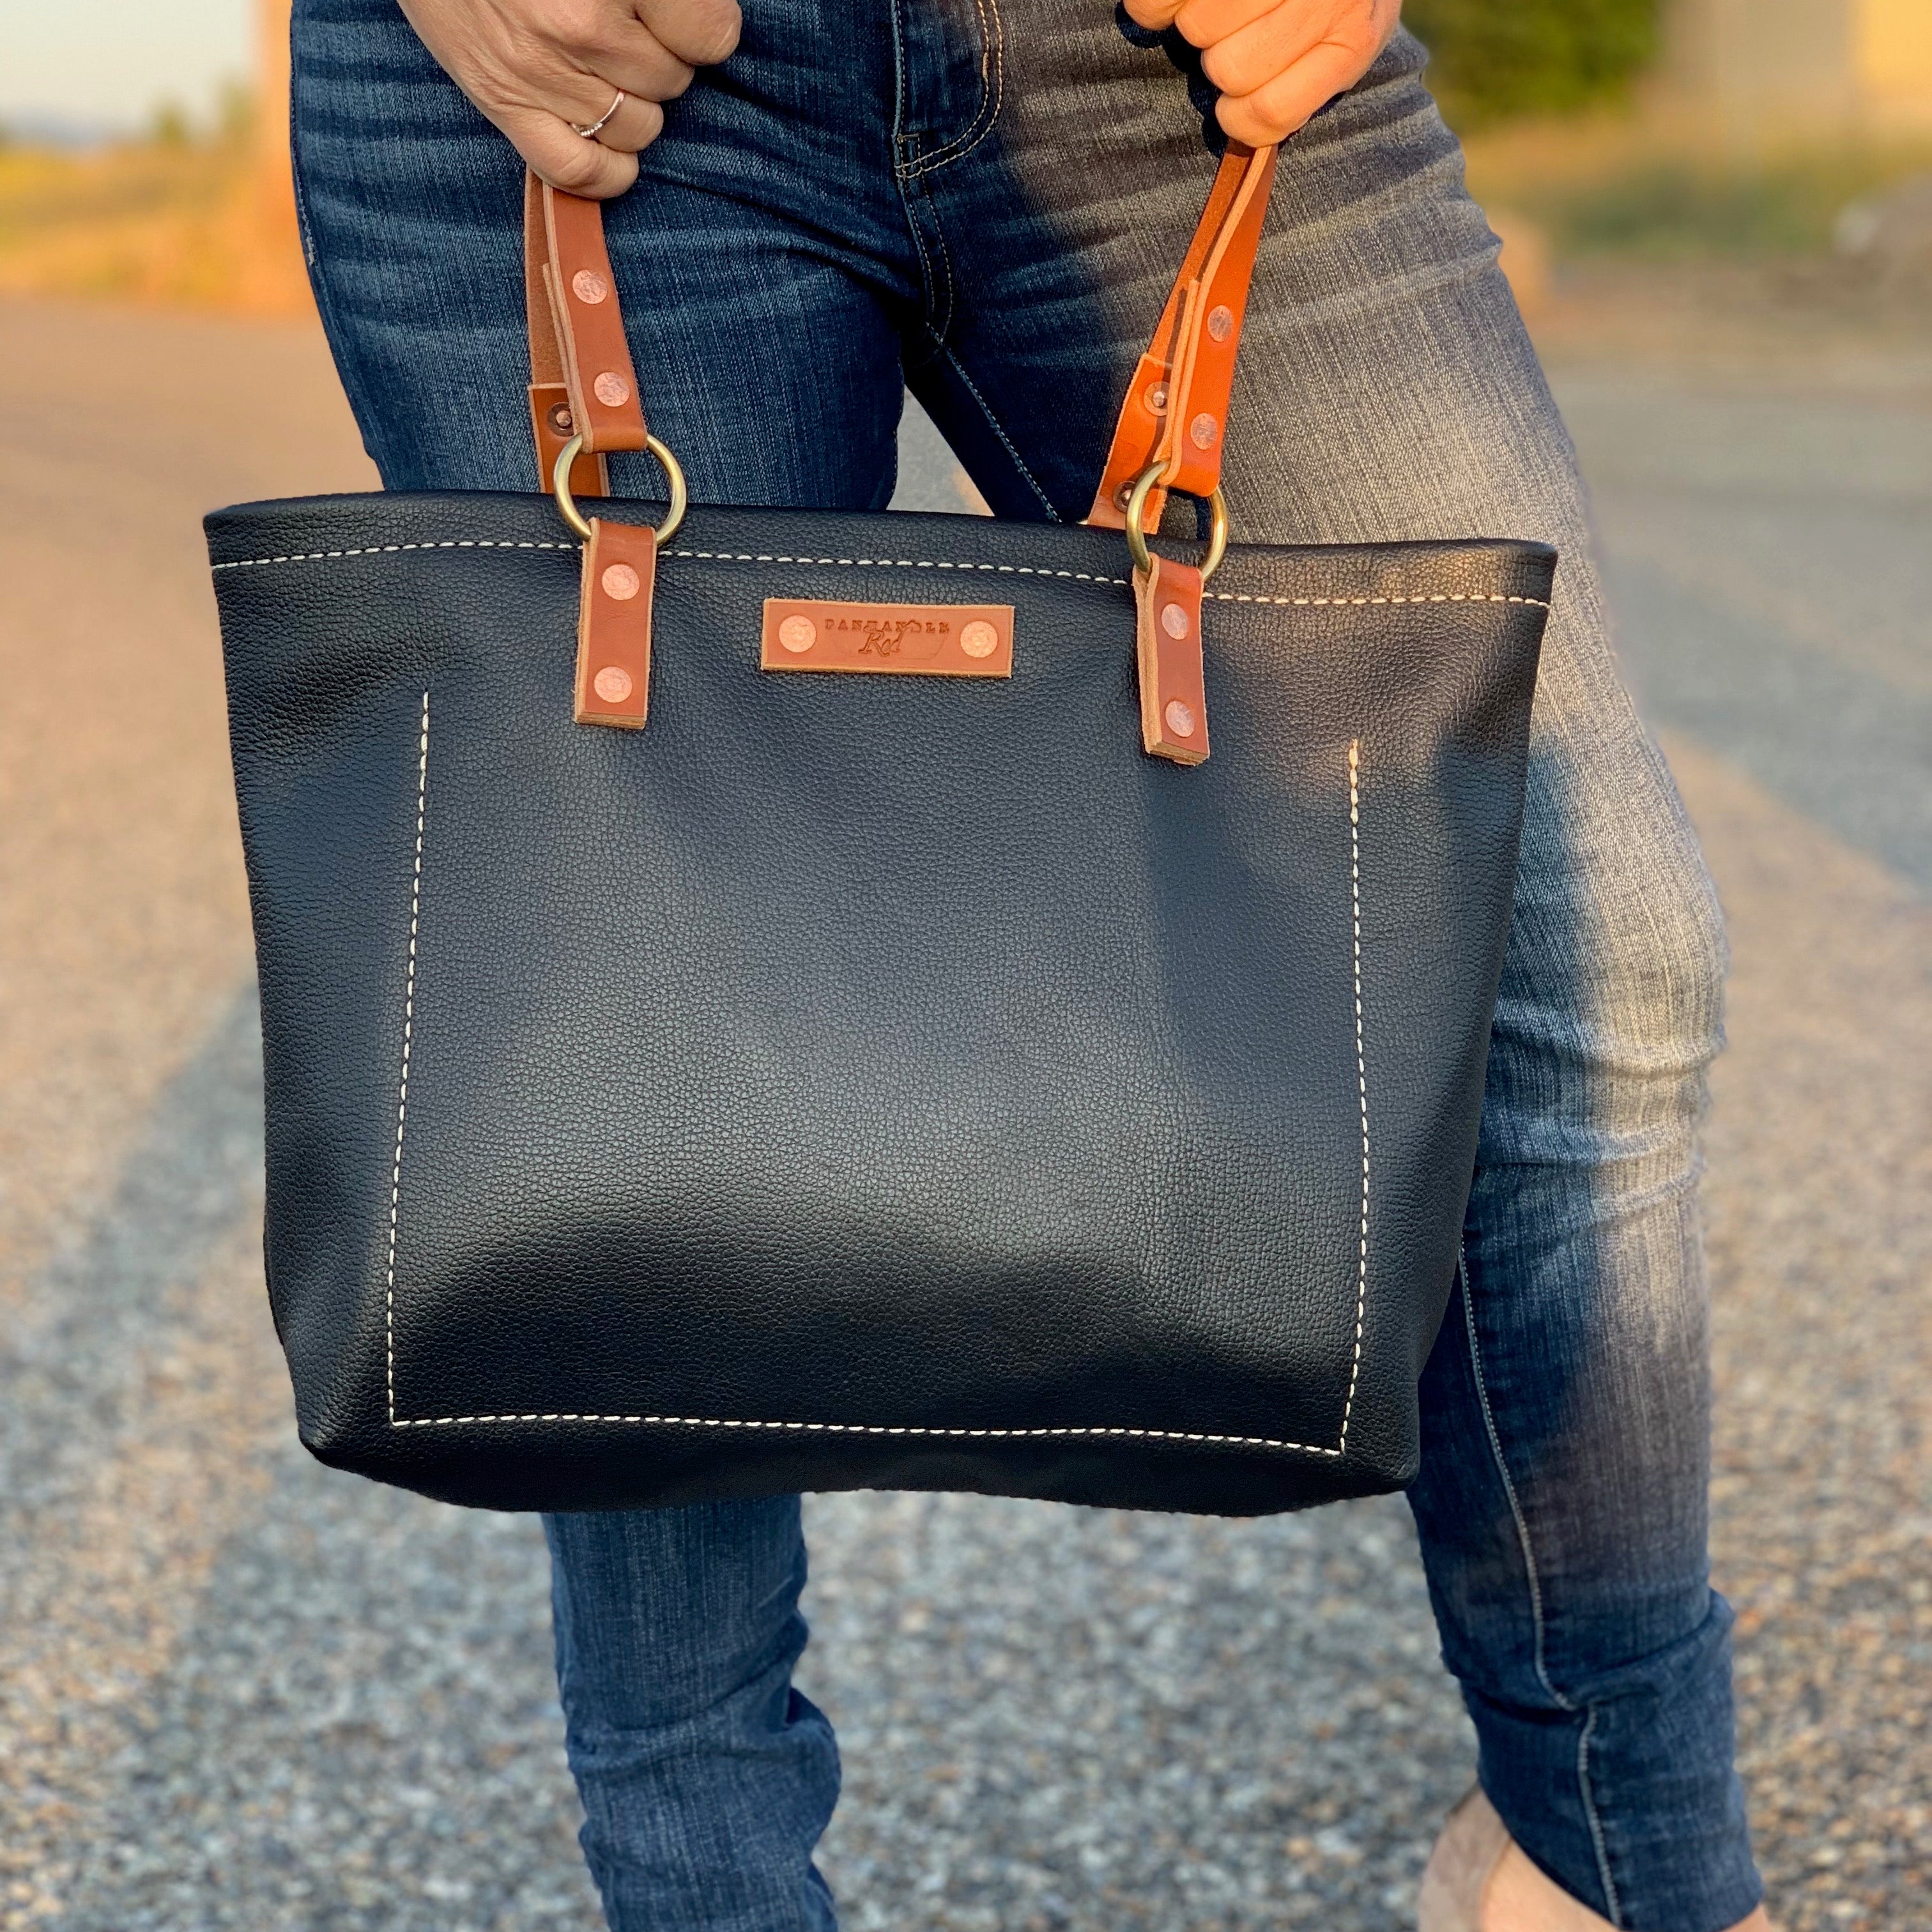 Black Leather Tote Bags, Black Leather Purse, Black Leather Bag, Black Purse, Gift Shop, Leather Goods, Leather Products, Panhandle Red Leather Company, Panhandle Red, gift shop, purses, handbags, tote bags, messenger bag, custom leather shop, gifts 